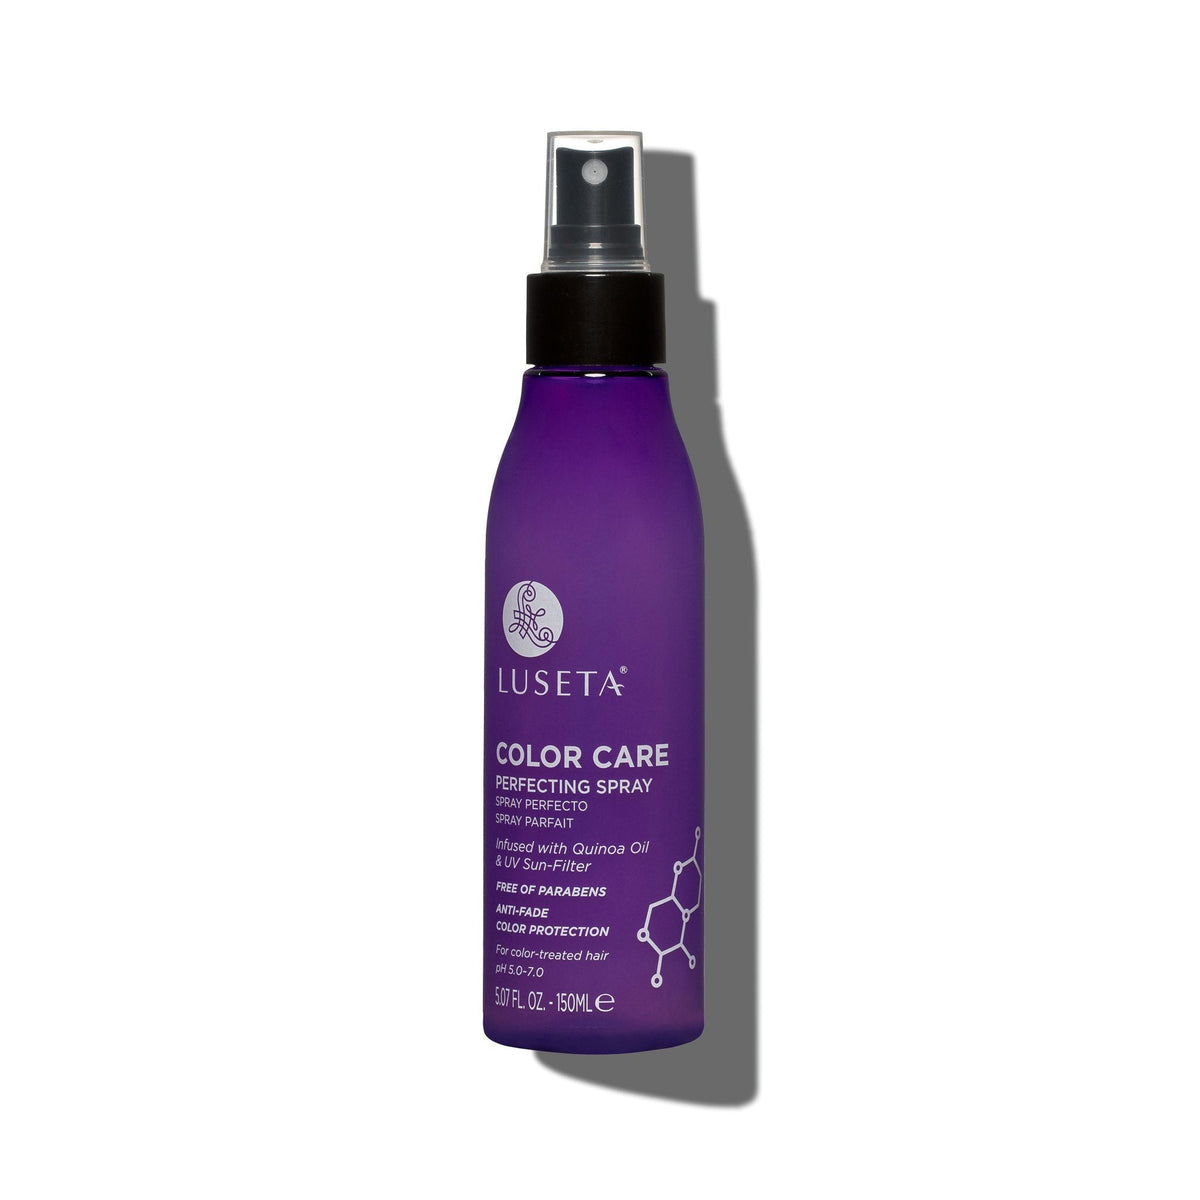 Color Care Perfecting Spray - 5.07oz - by Luseta Beauty |ProCare Outlet|